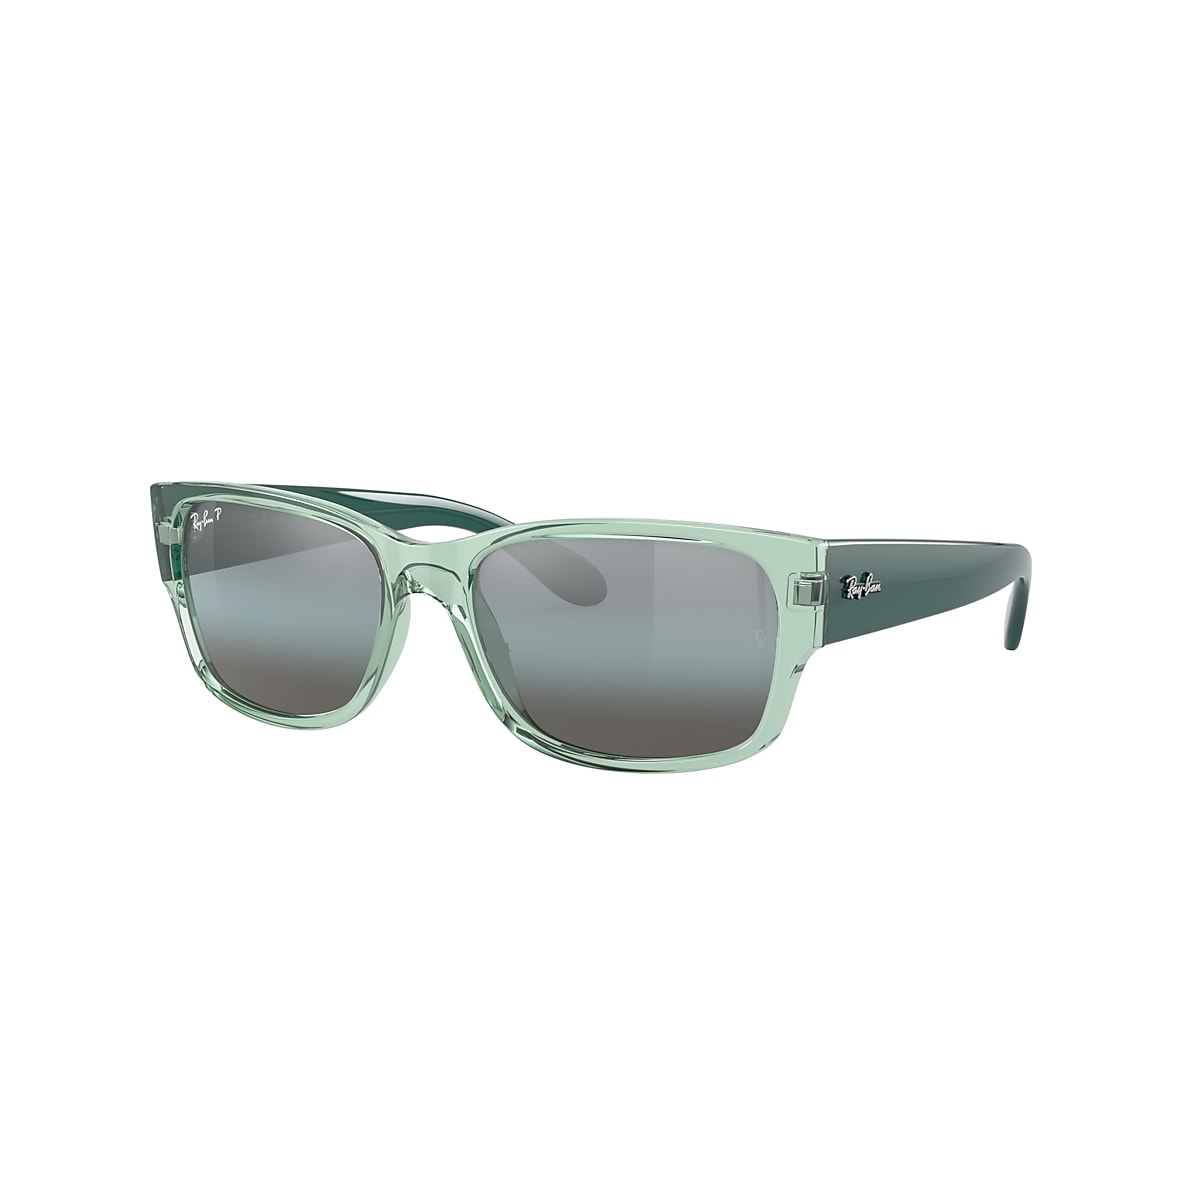 RB4388 Sunglasses in Transparent Green and Blue - RB4388 | Ray-Ban® US